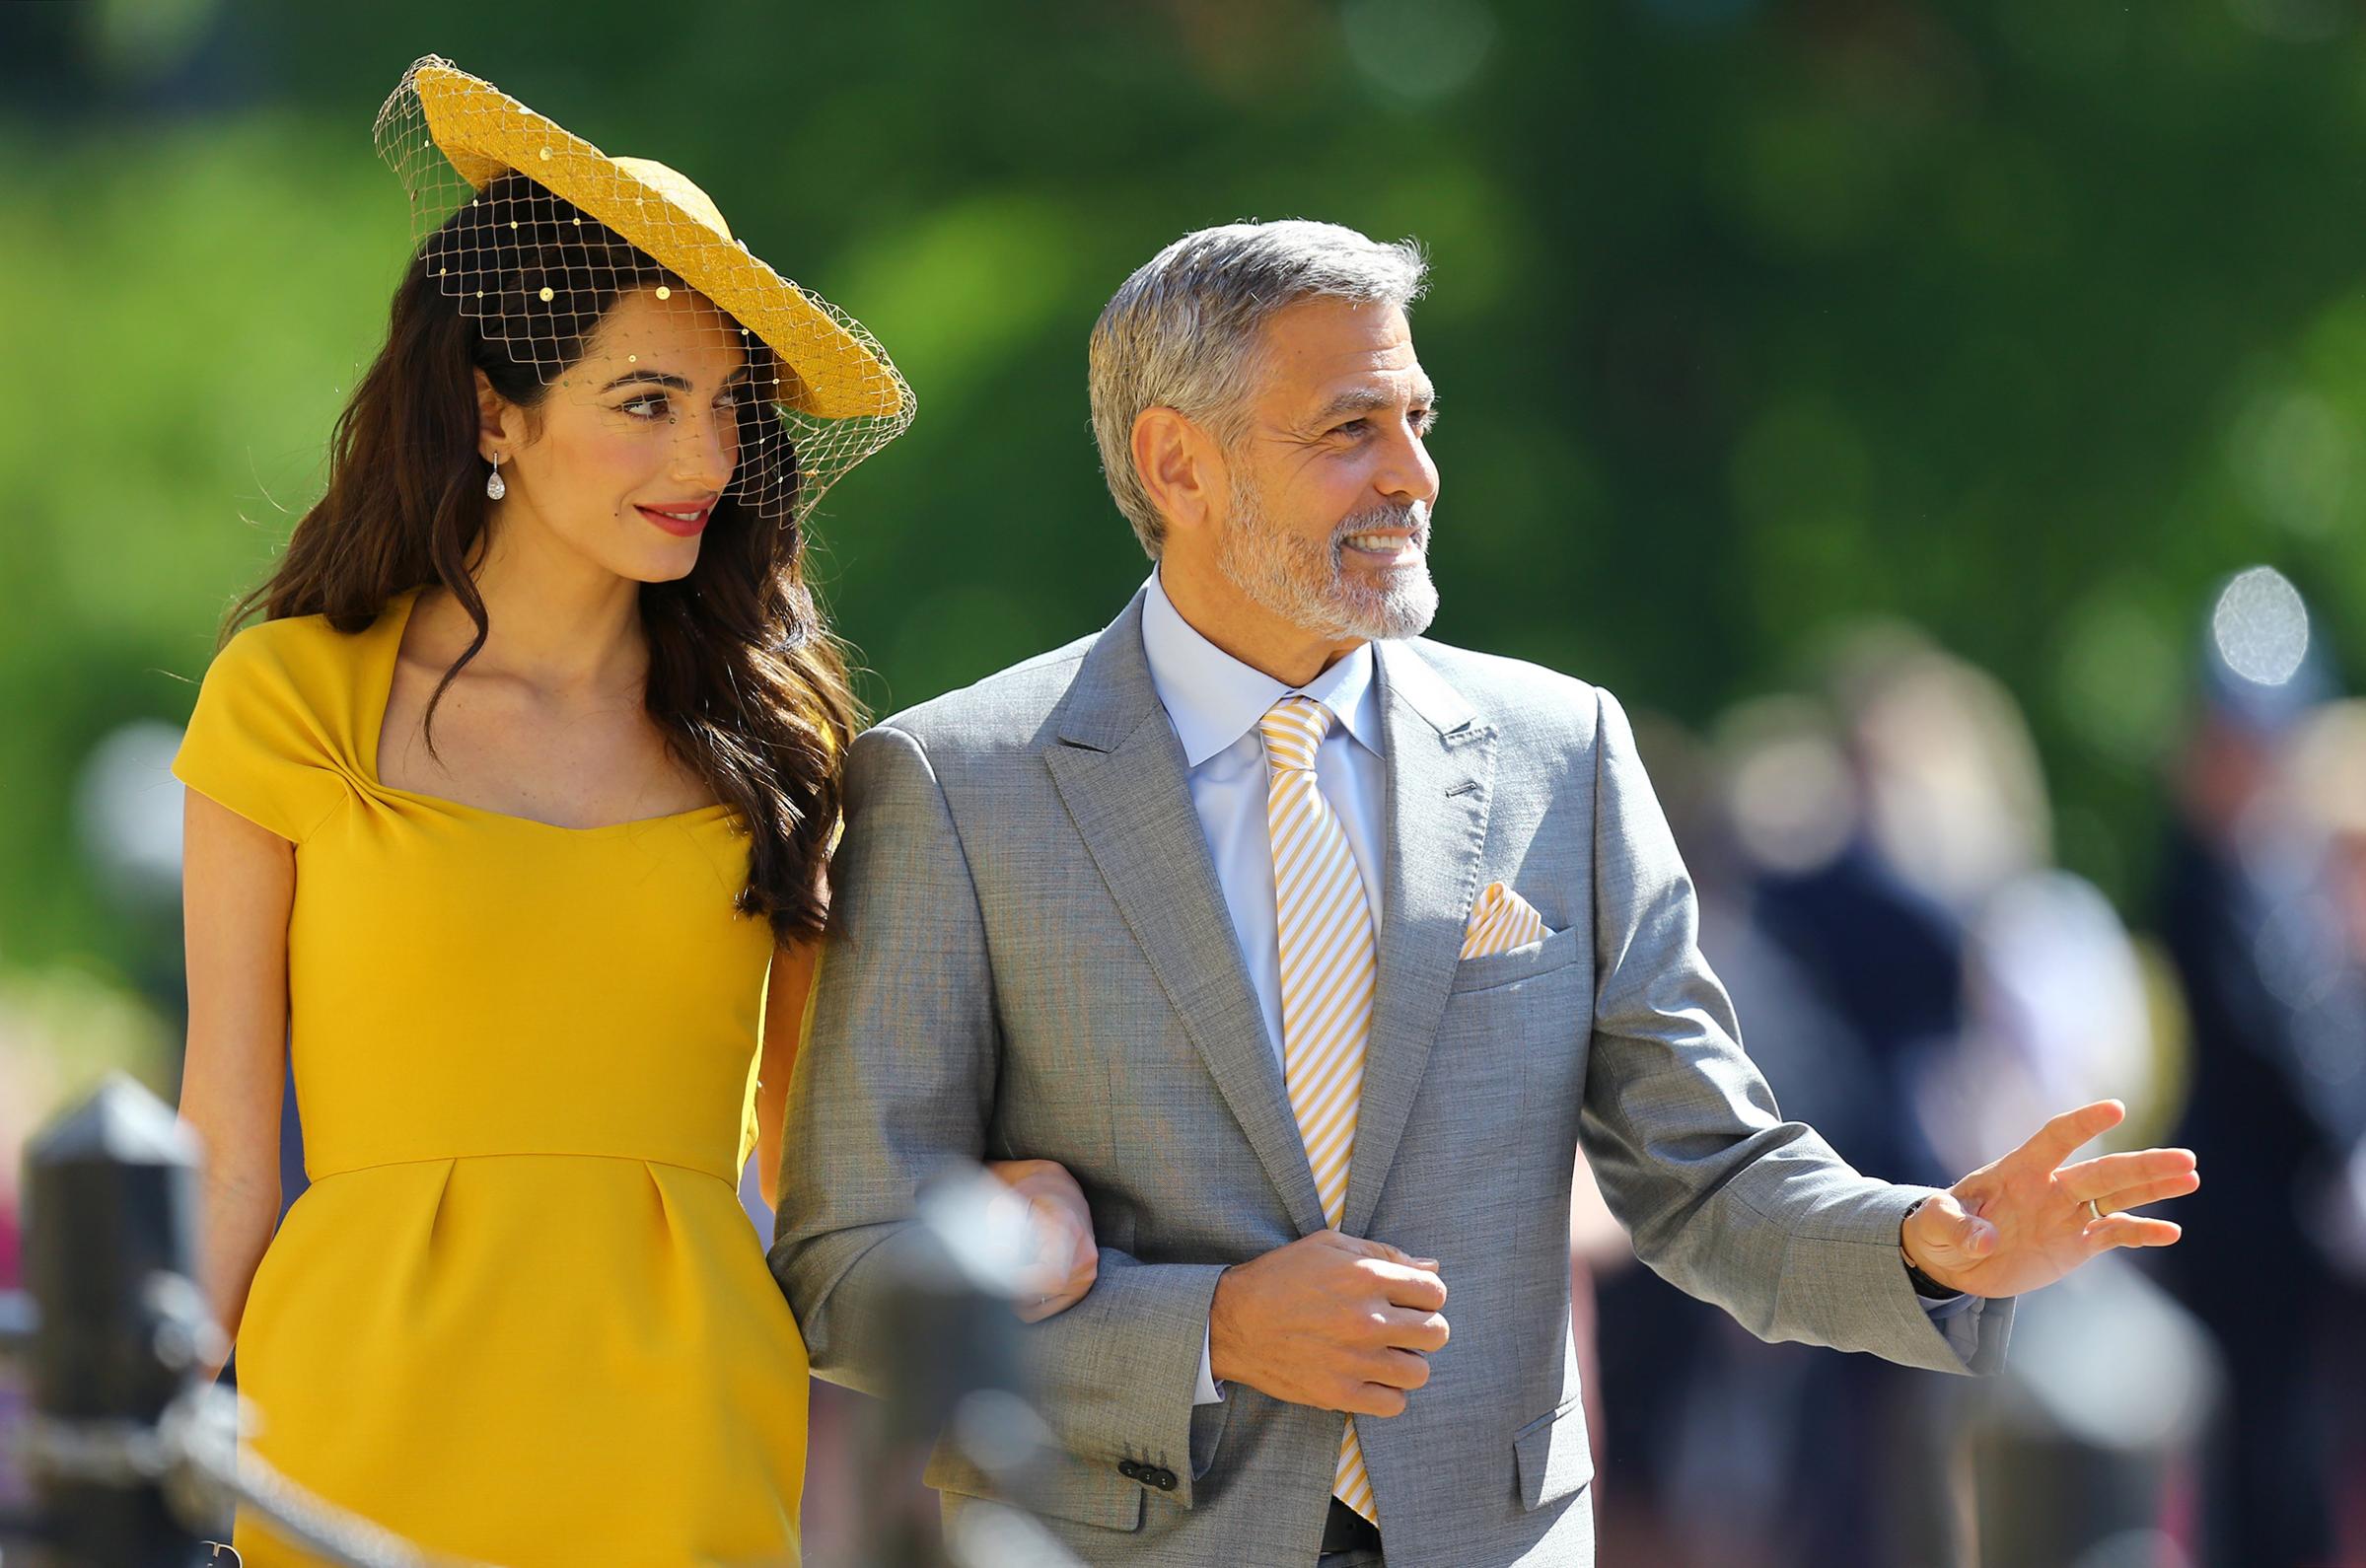 Amal Clooney and George Clooney arrive at St George's Chapel at Windsor Castle for the wedding of Meghan Markle and Prince Harry, May 19, 2018.